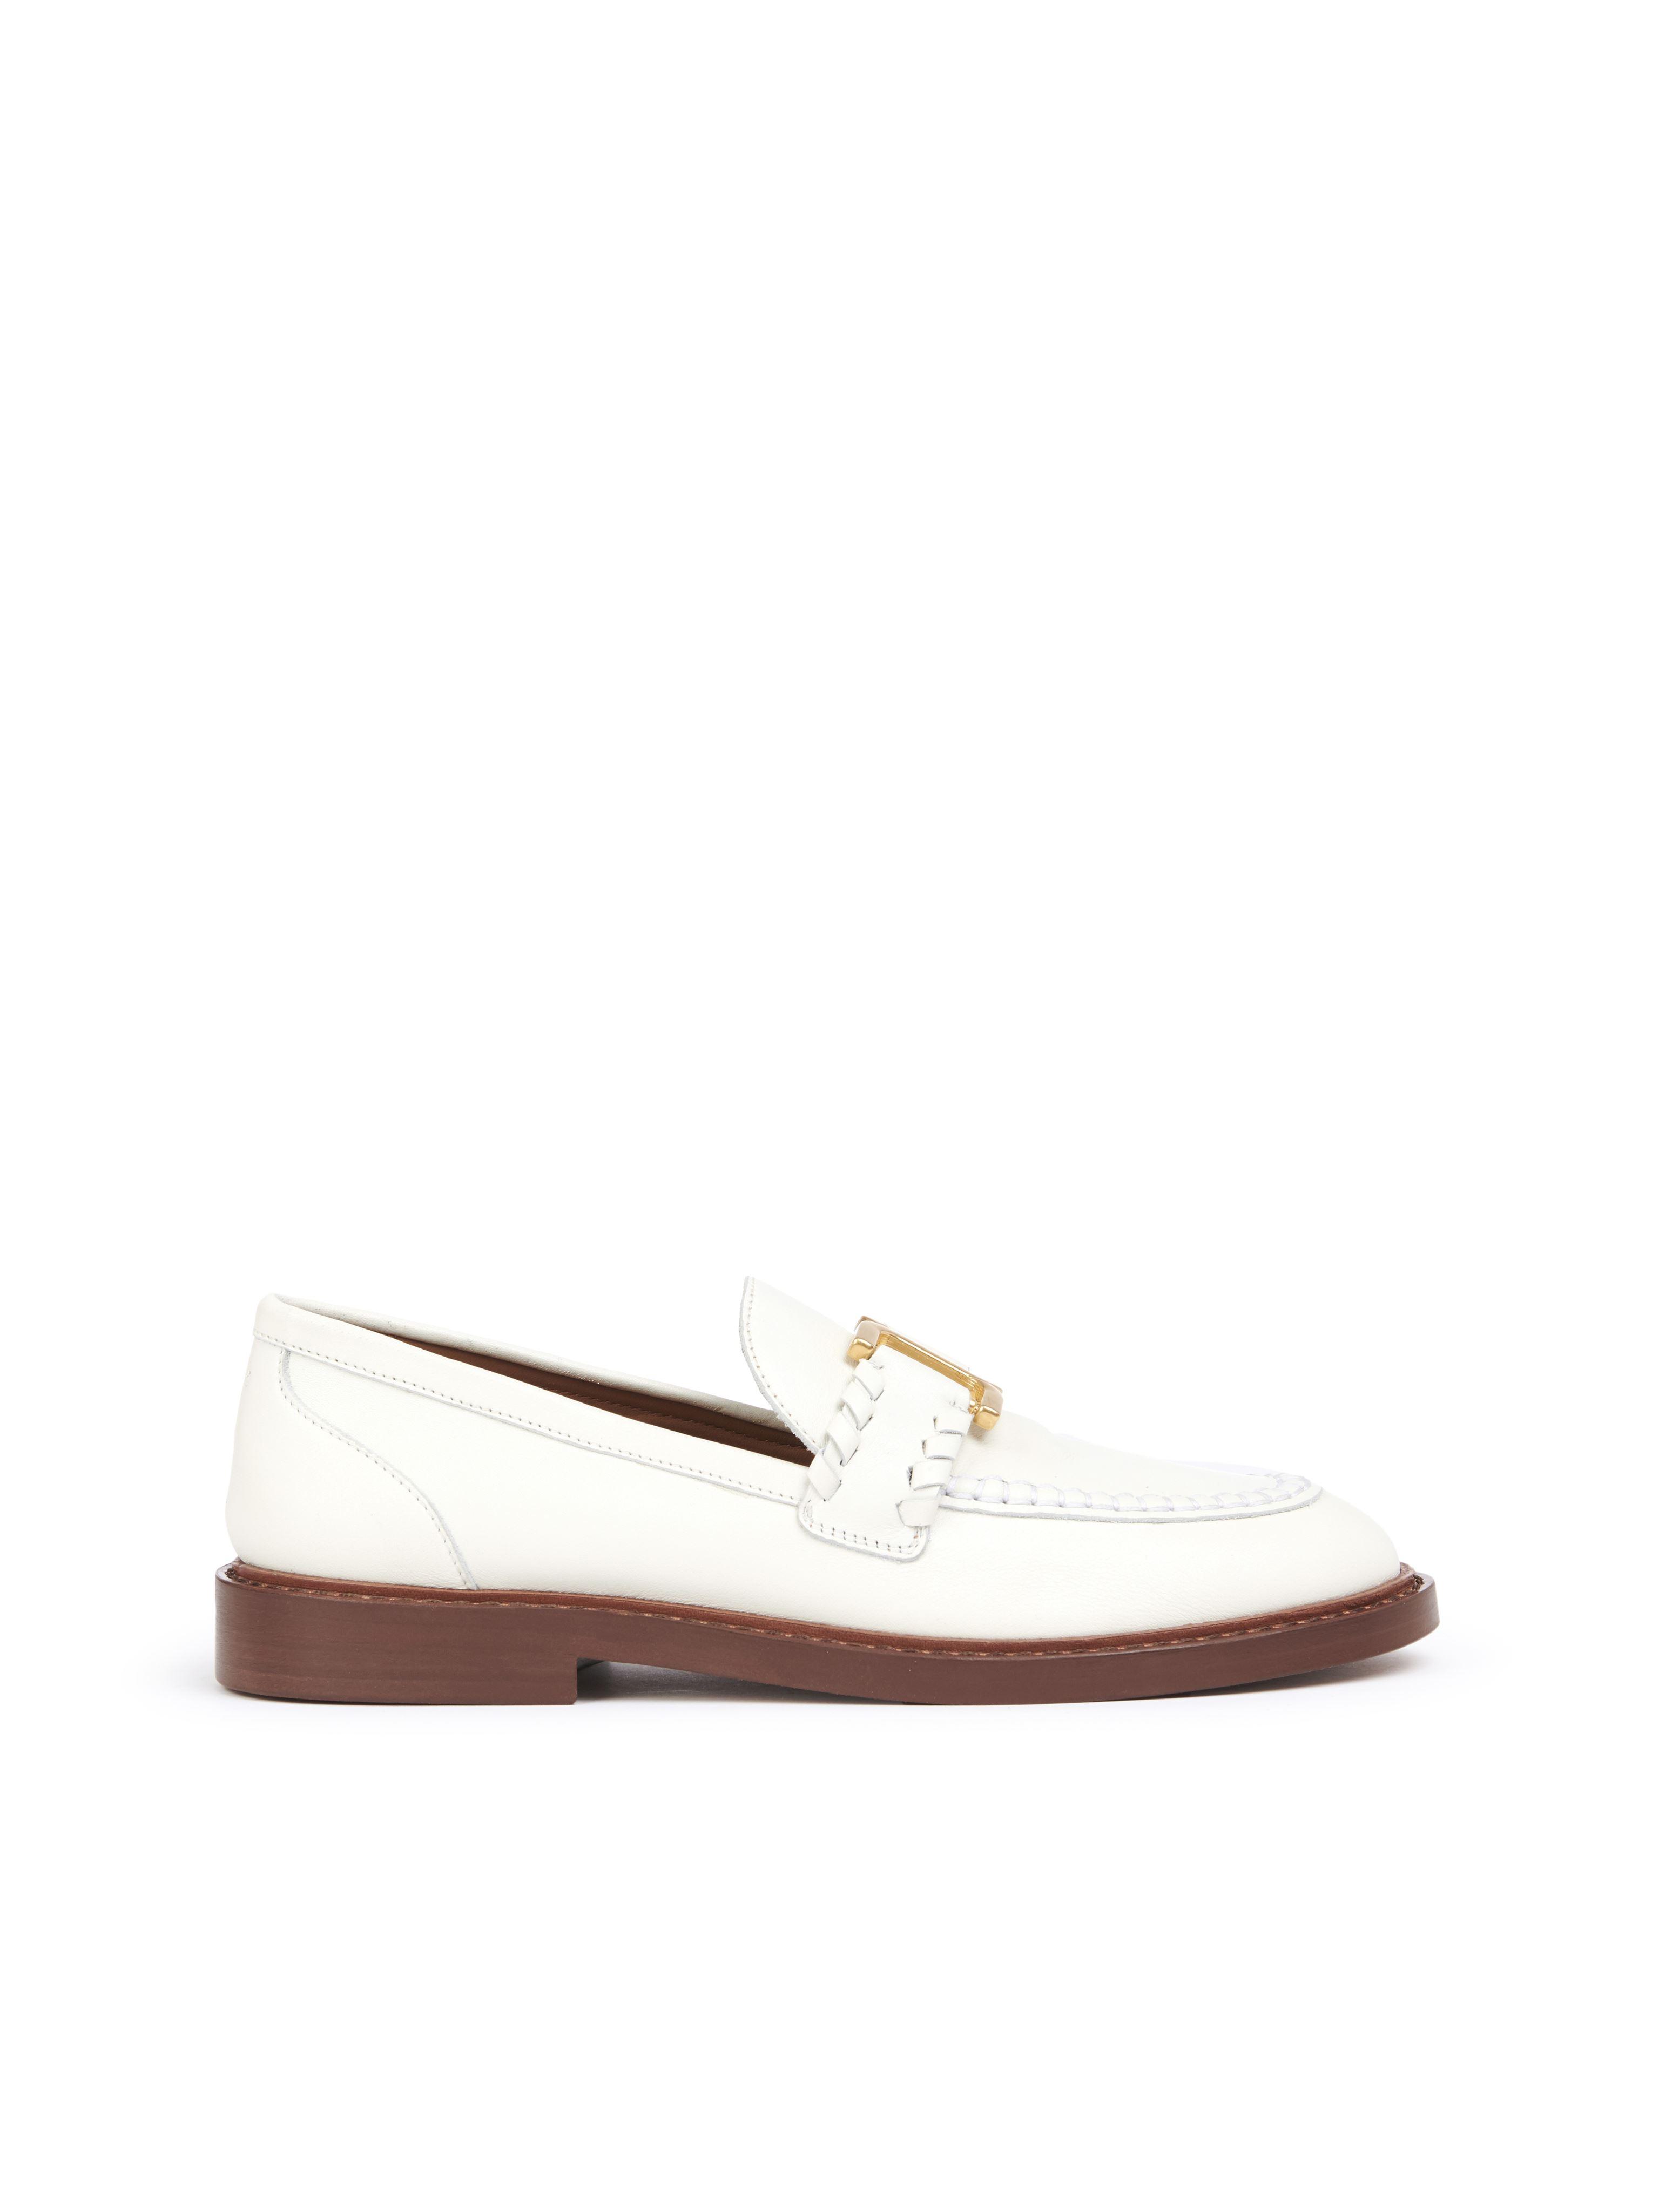 Chloé Marcie Loafer in White | Lyst